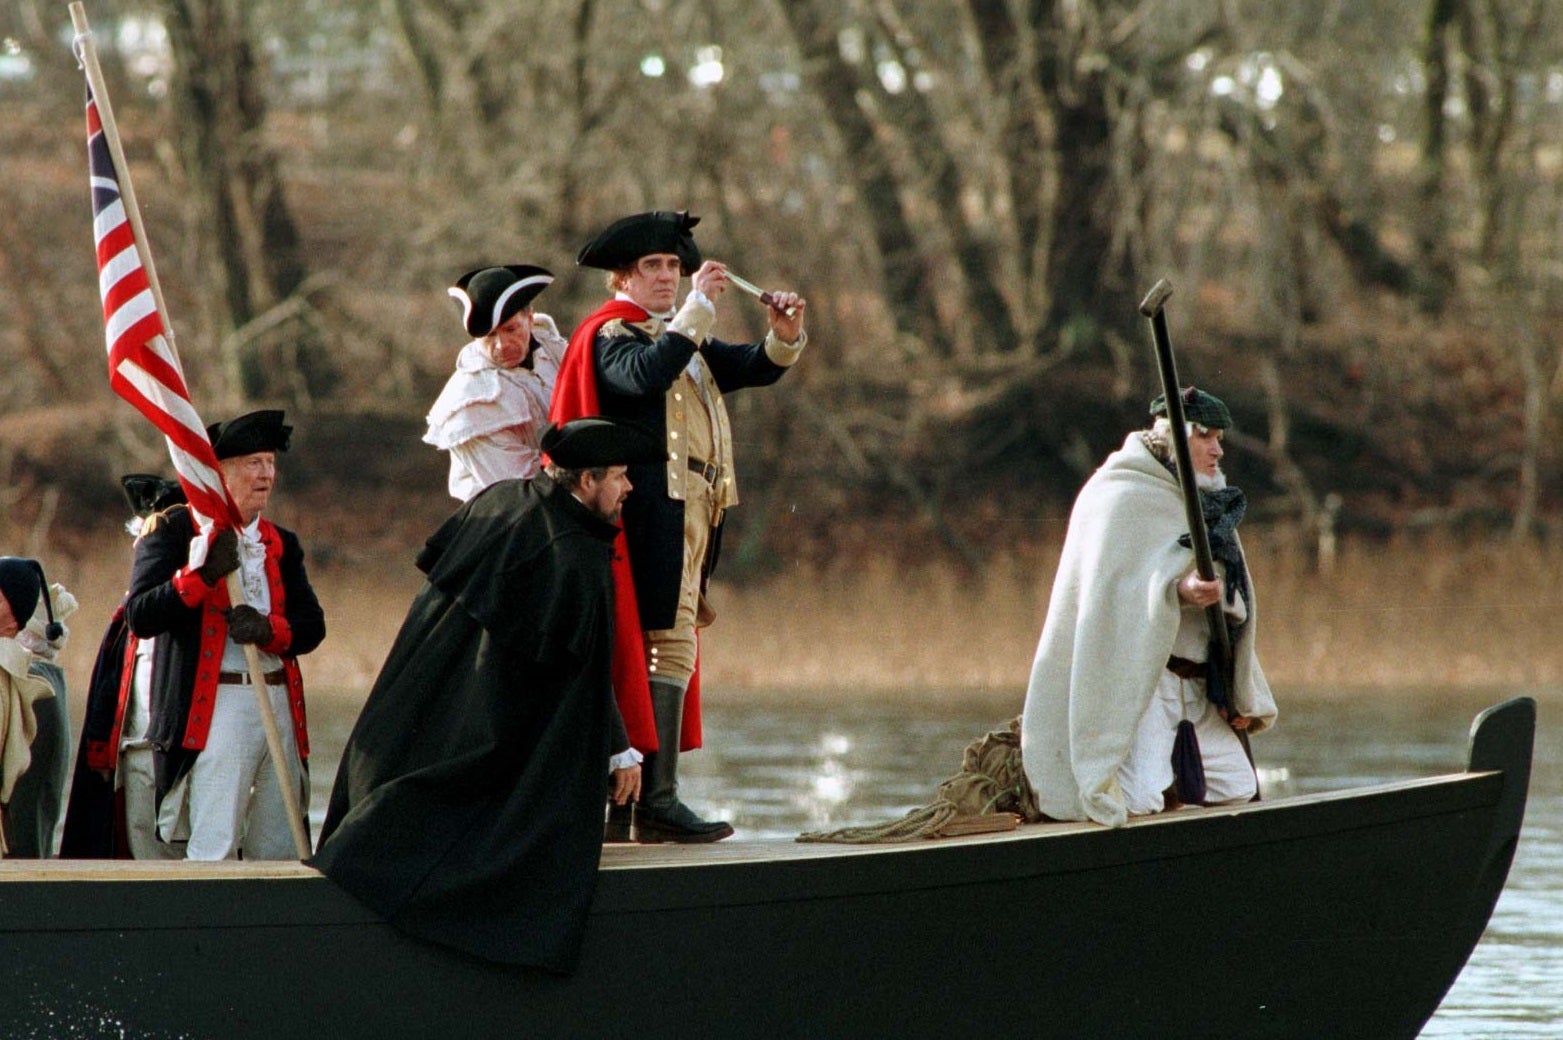 Washington crossing the Delaware: Reenactment is revived